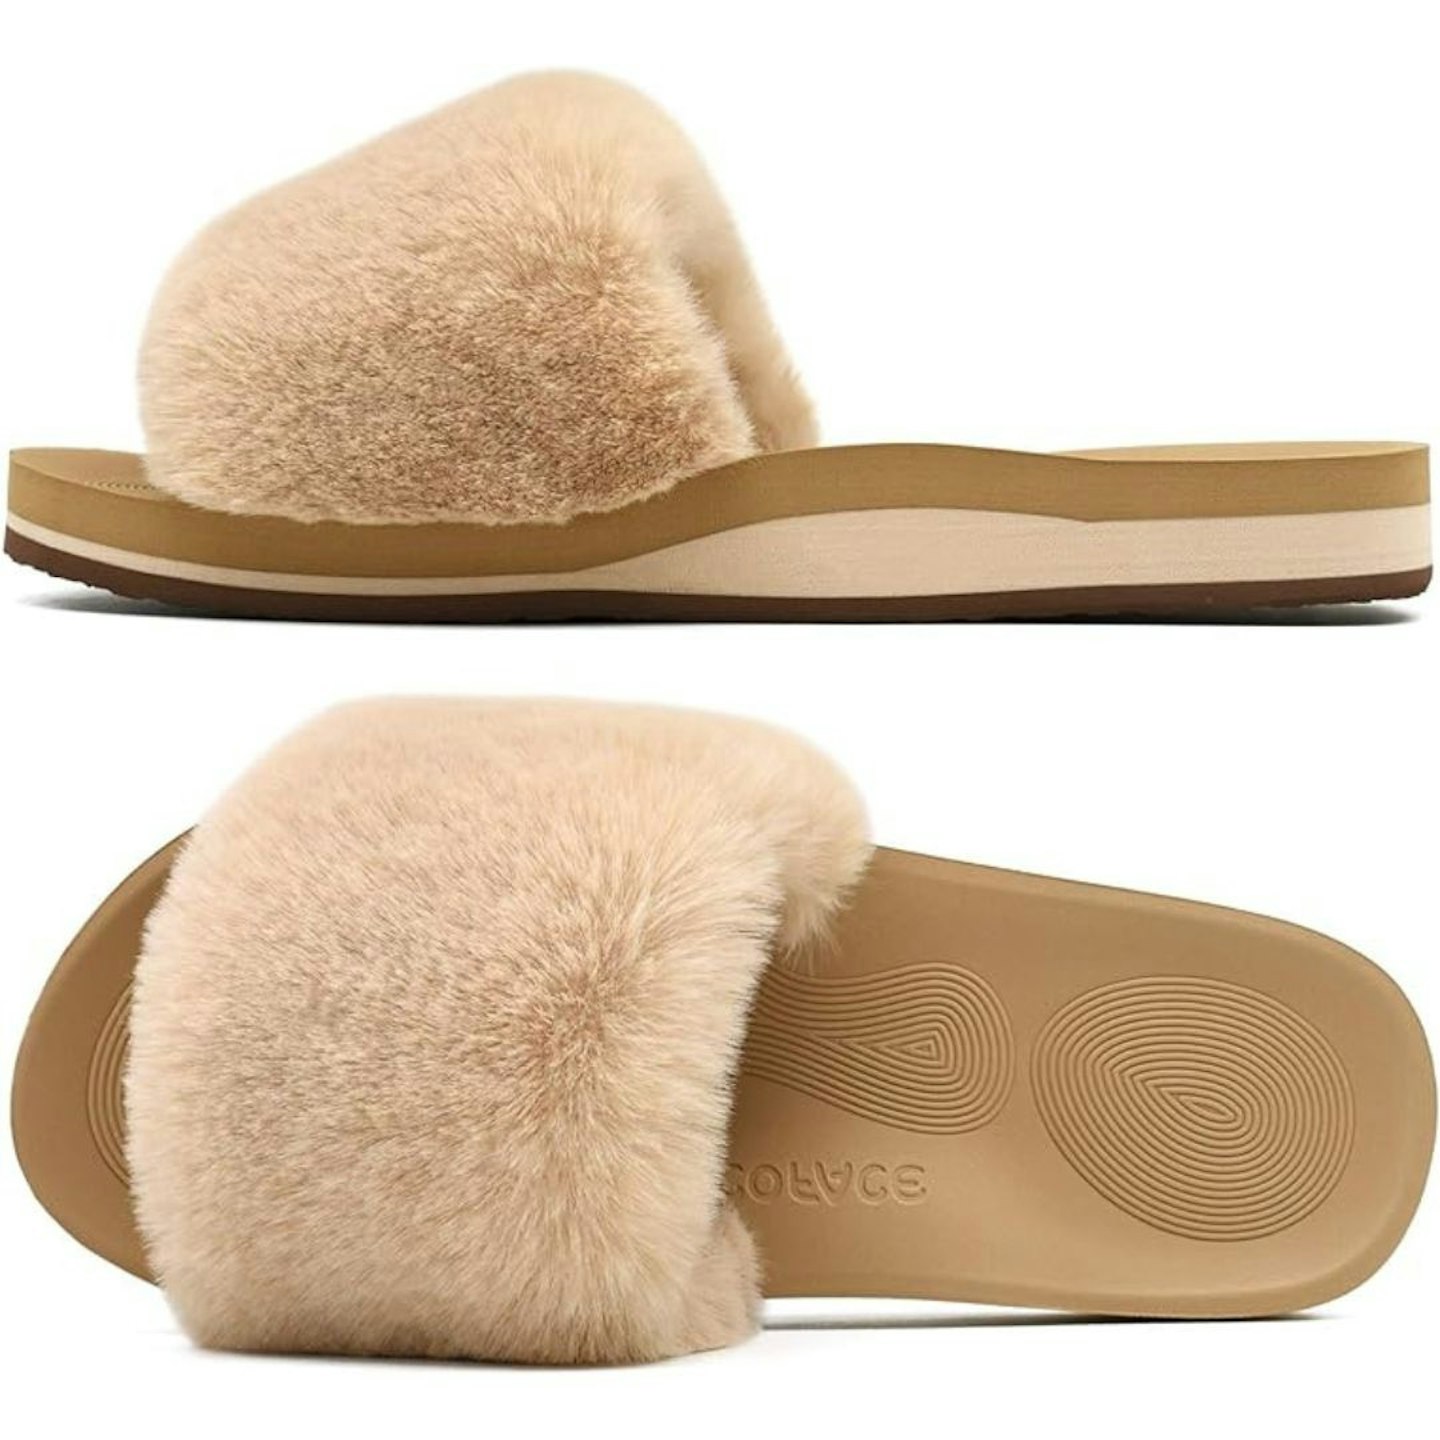 Coface - Arch Support Slippers